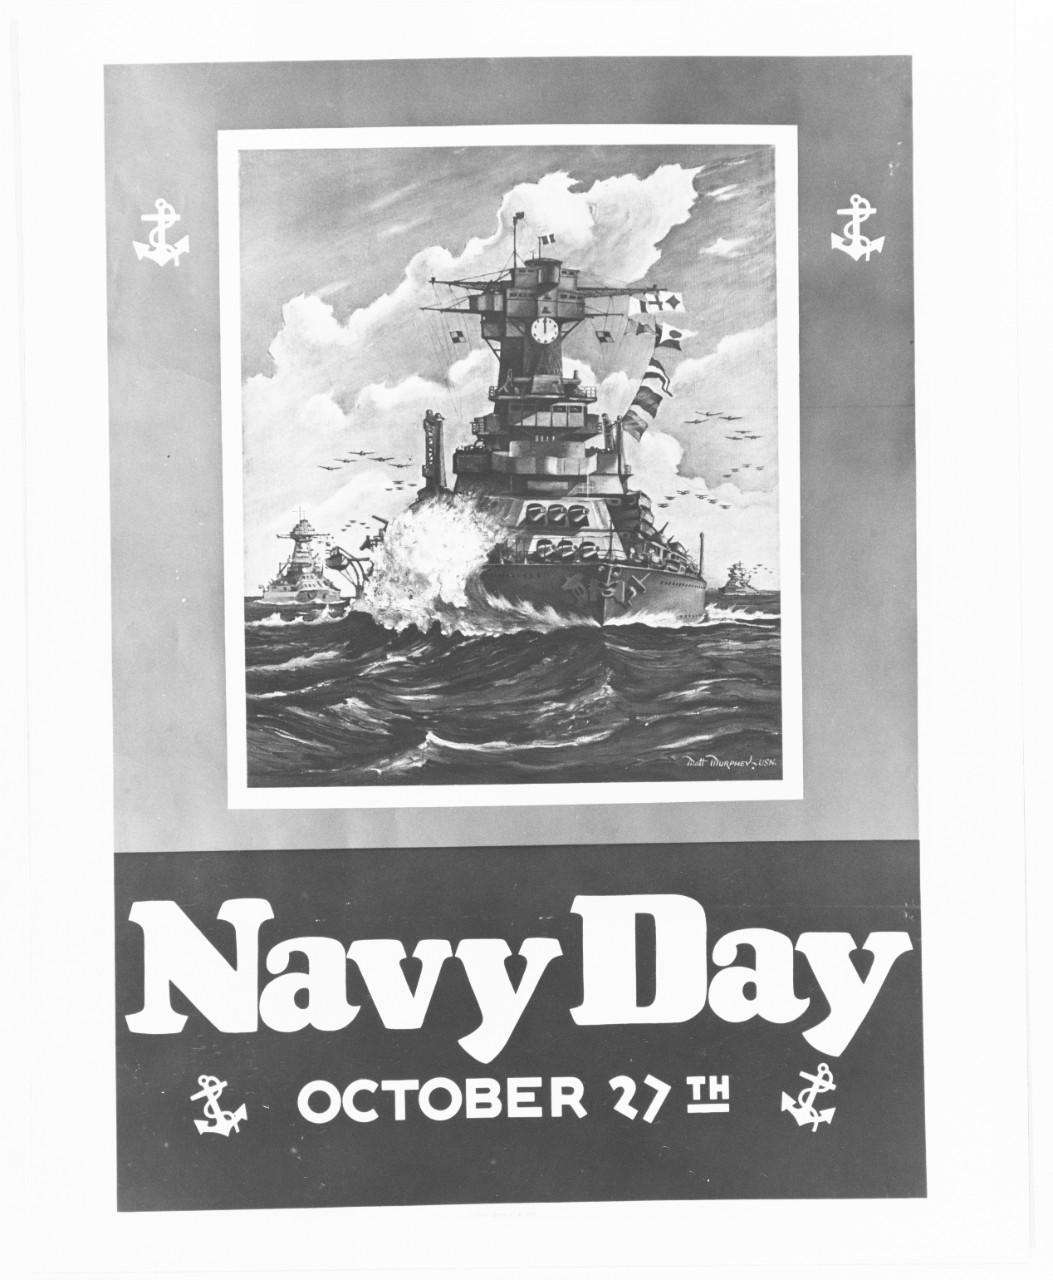 Navy Day poster